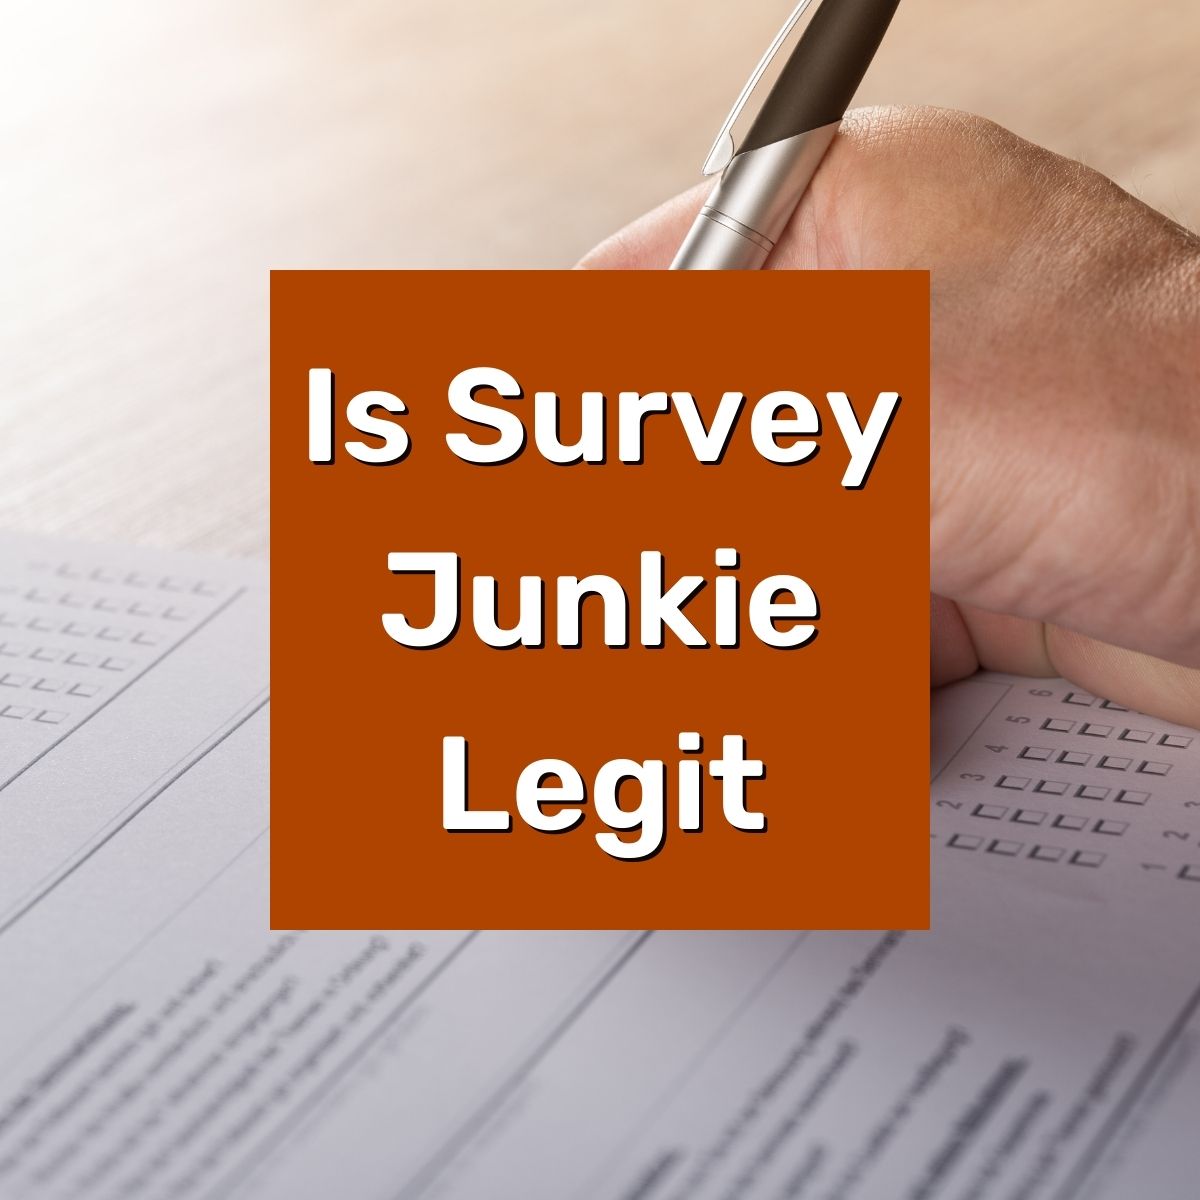 a hand writing on a survey with text overlay